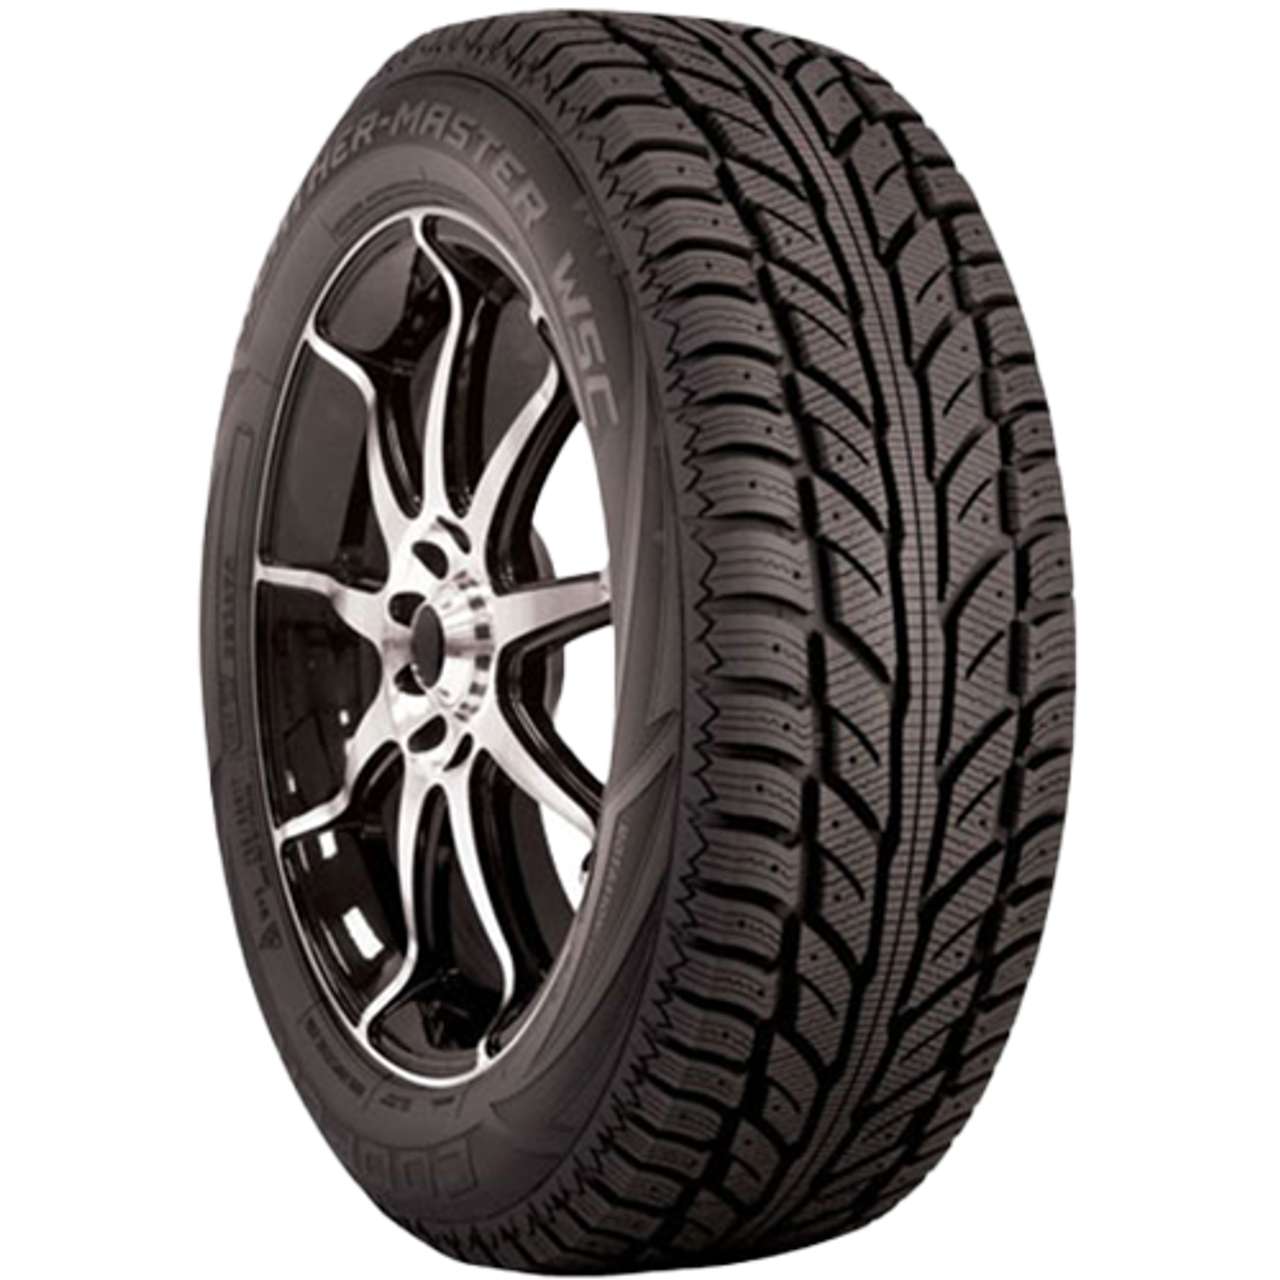 COOPER WEATHERMASTER WSC 235/60R18 107T STUDDABLE BSW XL